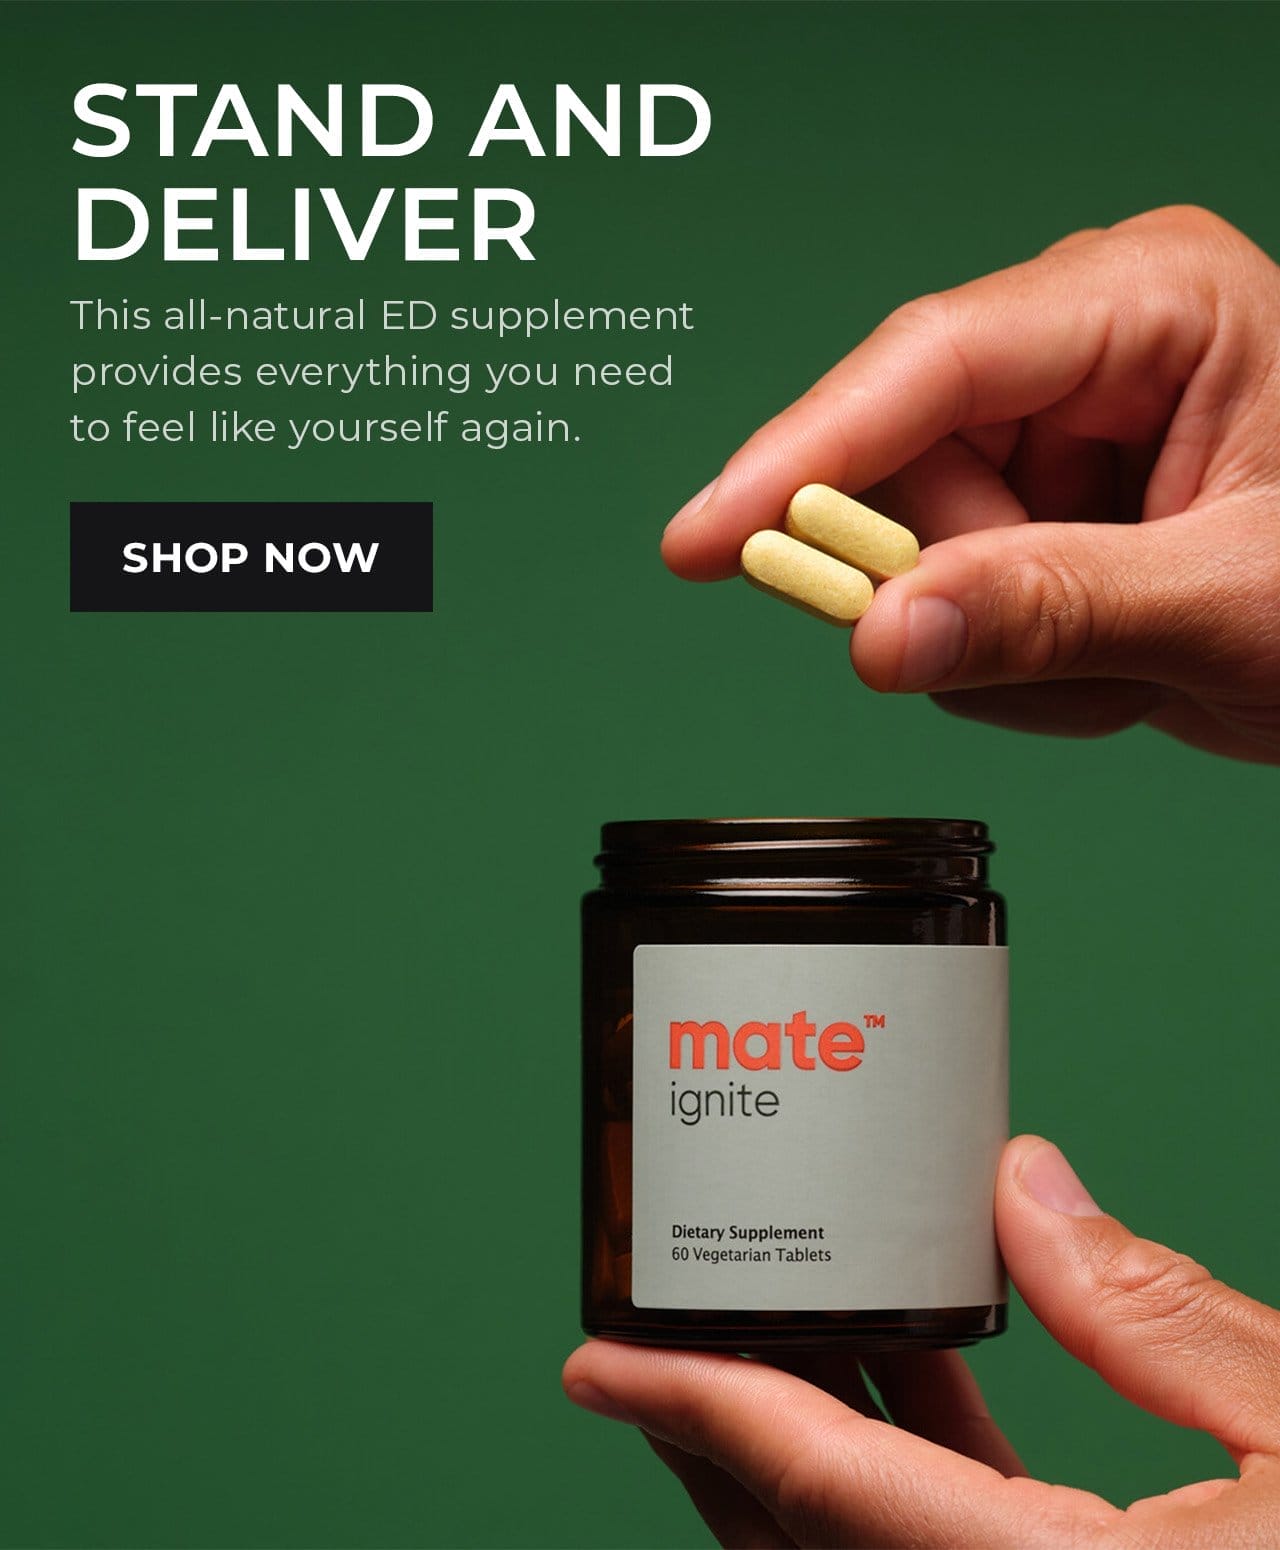 All-Natural ED Supplement | SHOP NOW